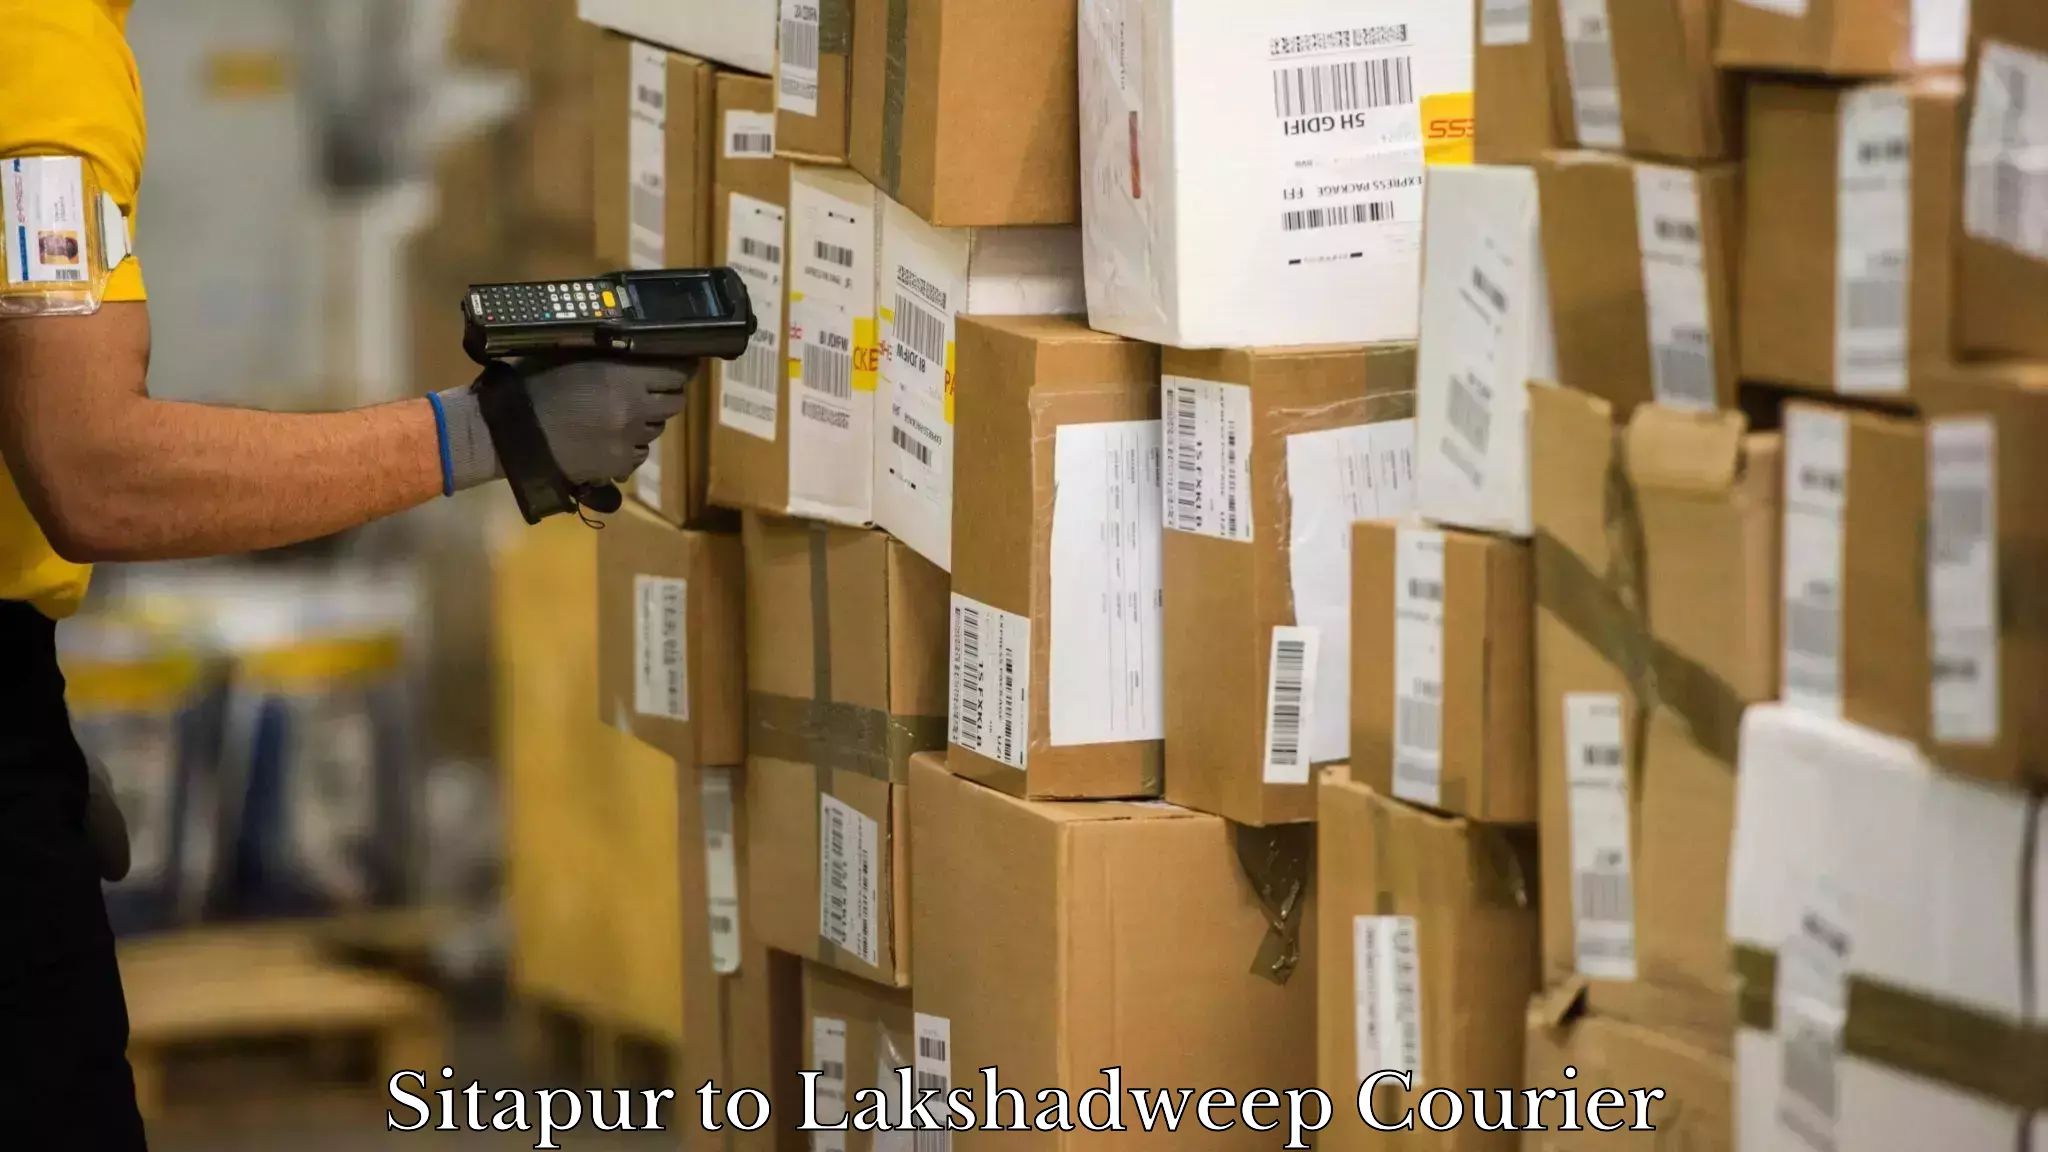 Online shipping calculator Sitapur to Lakshadweep